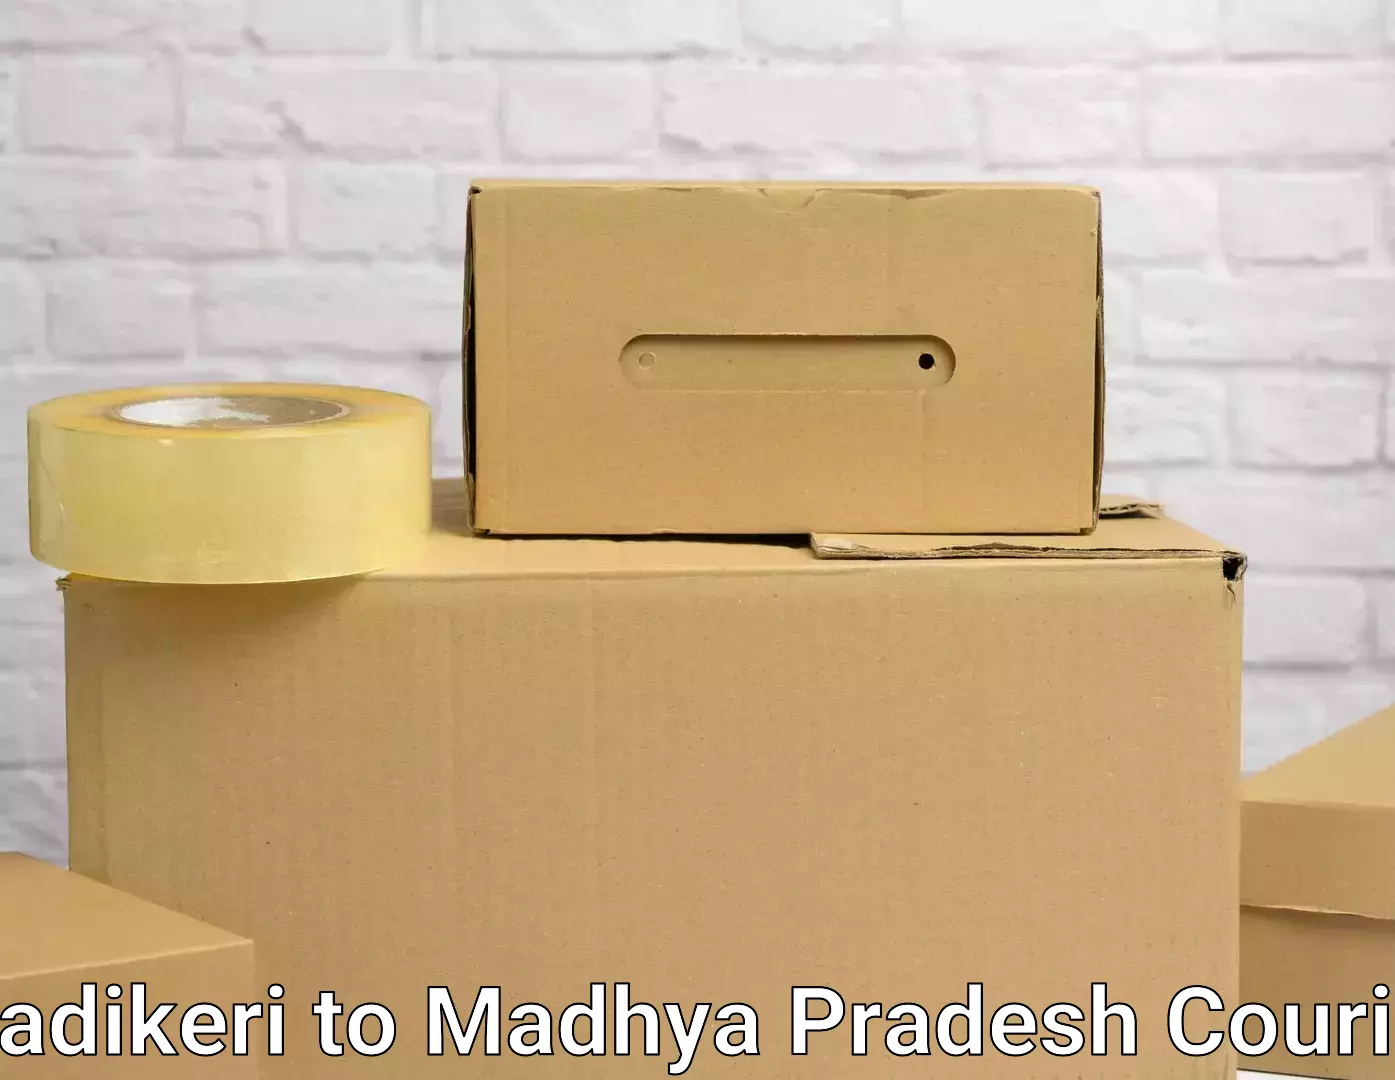 Quality relocation services in Madikeri to Lavkush Nagar